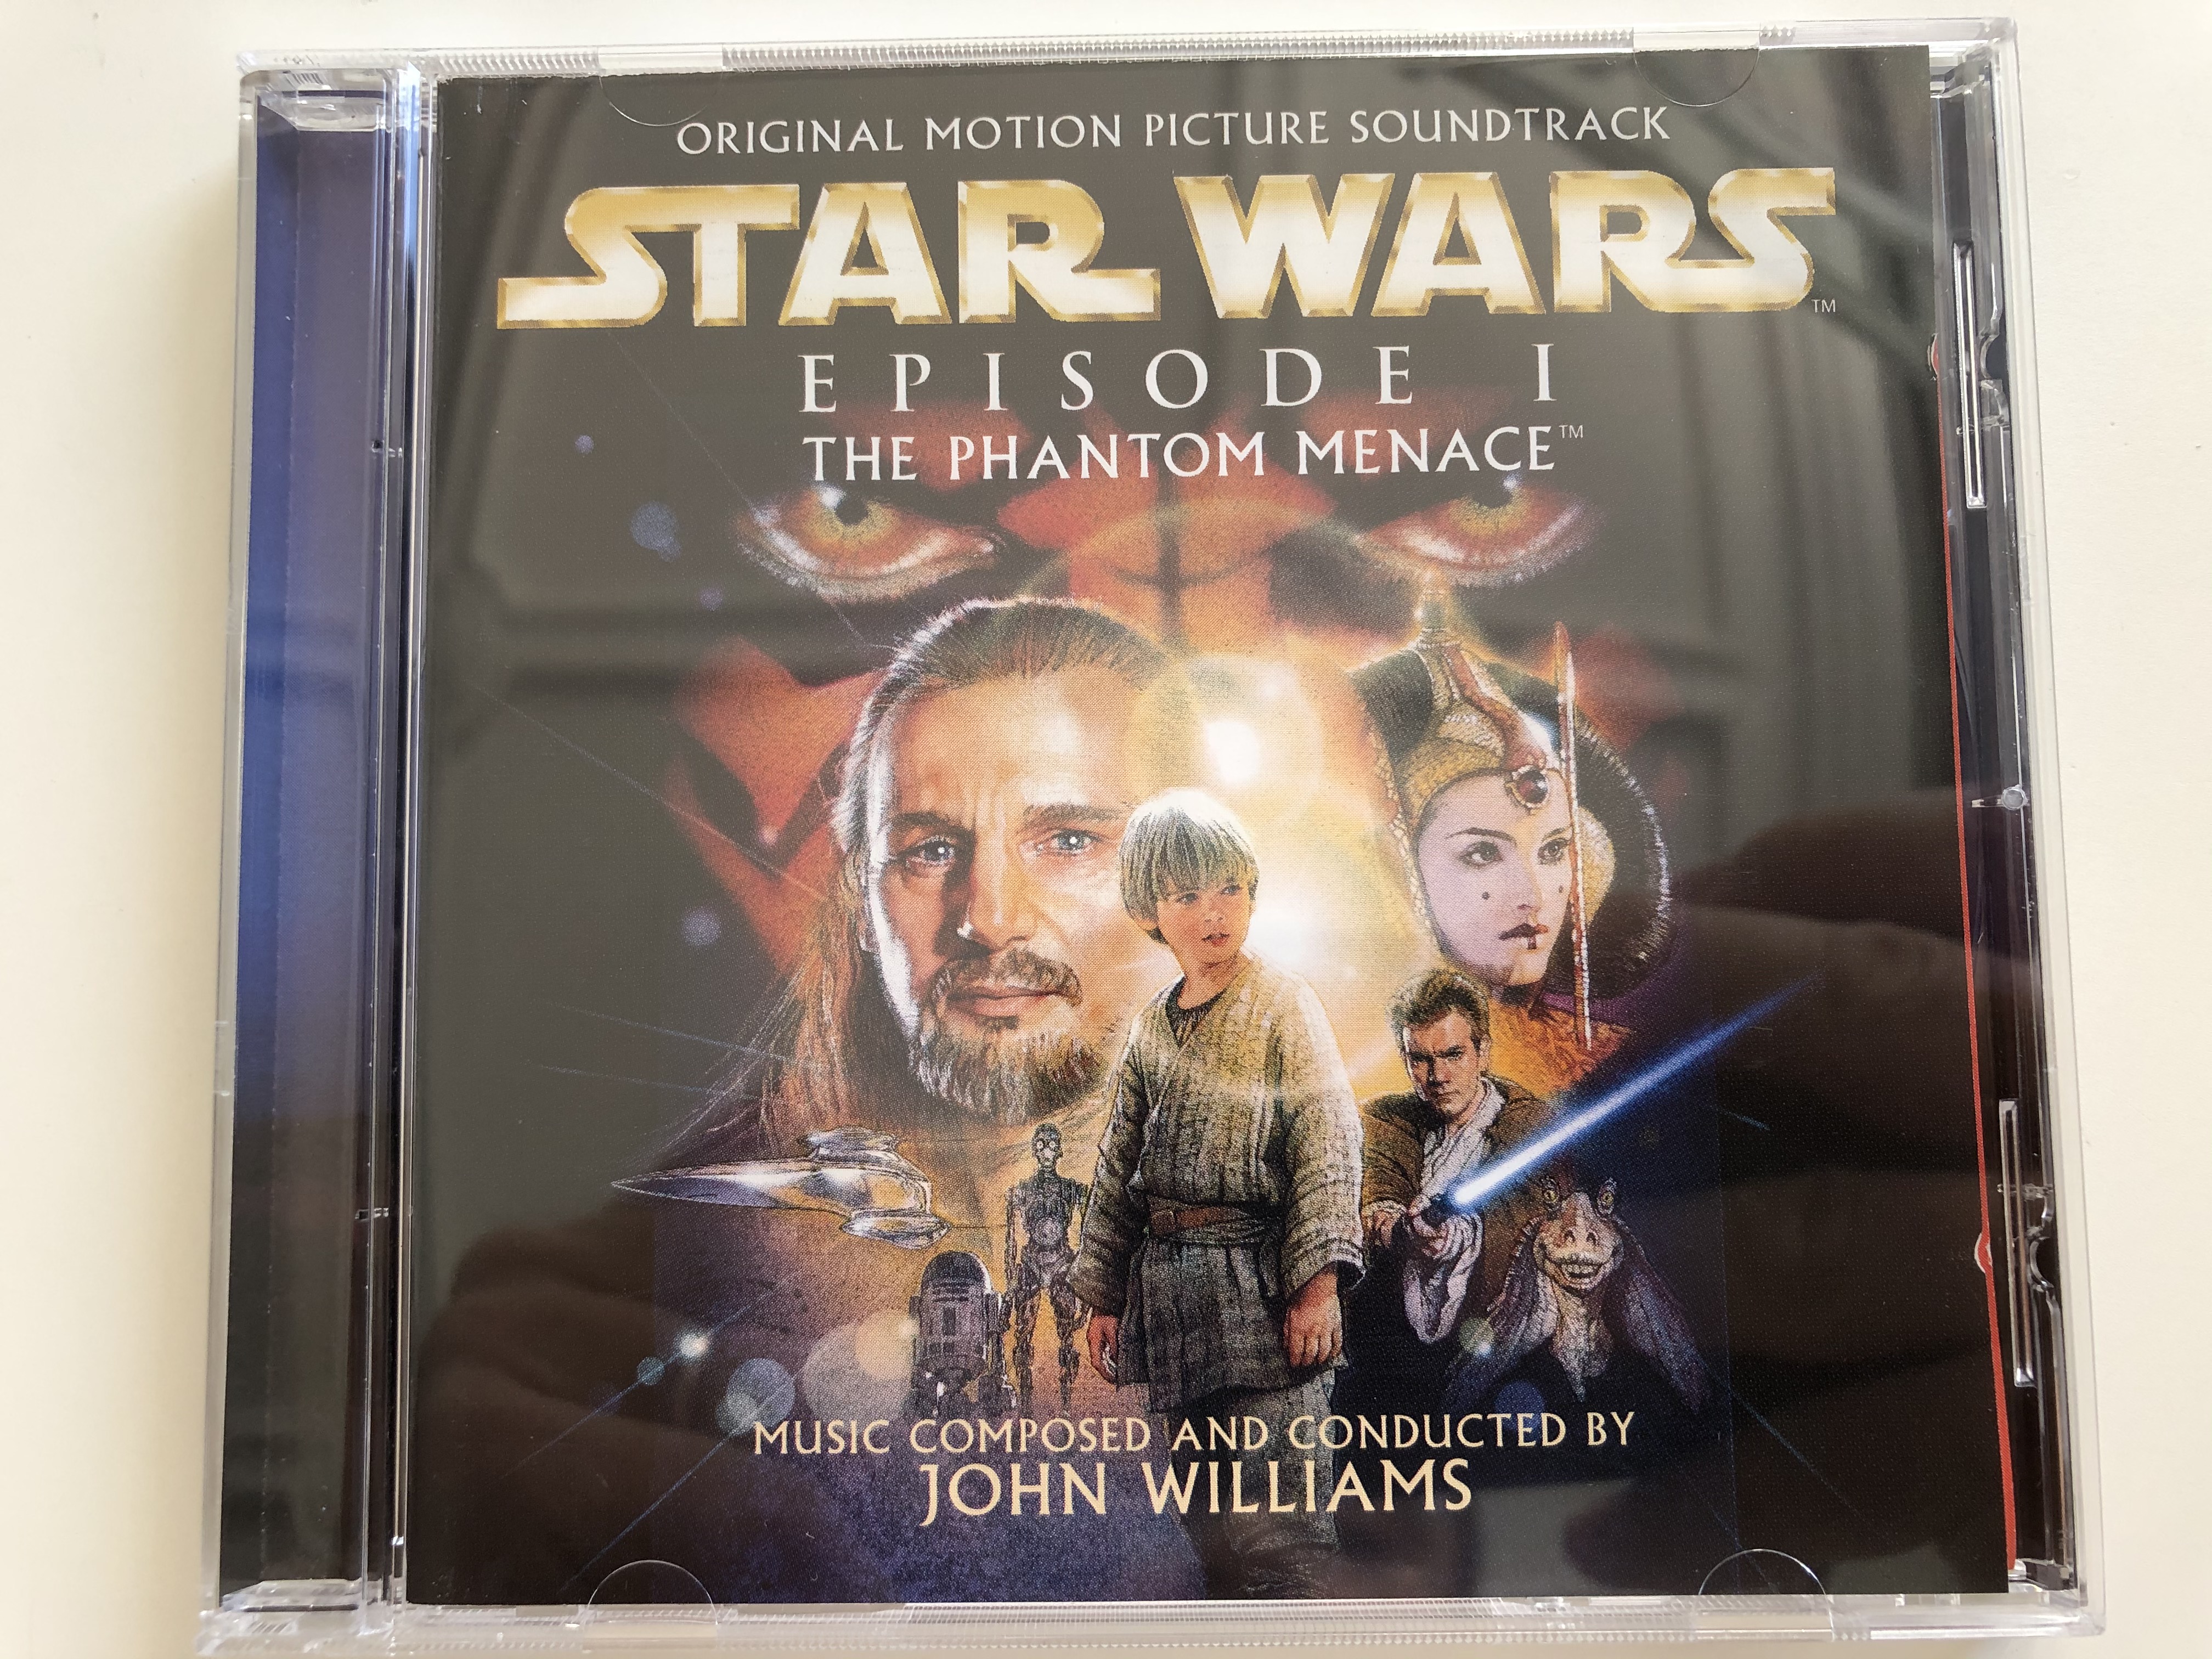 original-motion-picture-soundtrack-star-wars-episode-i-the-phantom-menace-music-composed-and-conducted-by-john-williams-sony-classical-audio-cd-1999-sk-61816-1-.jpg